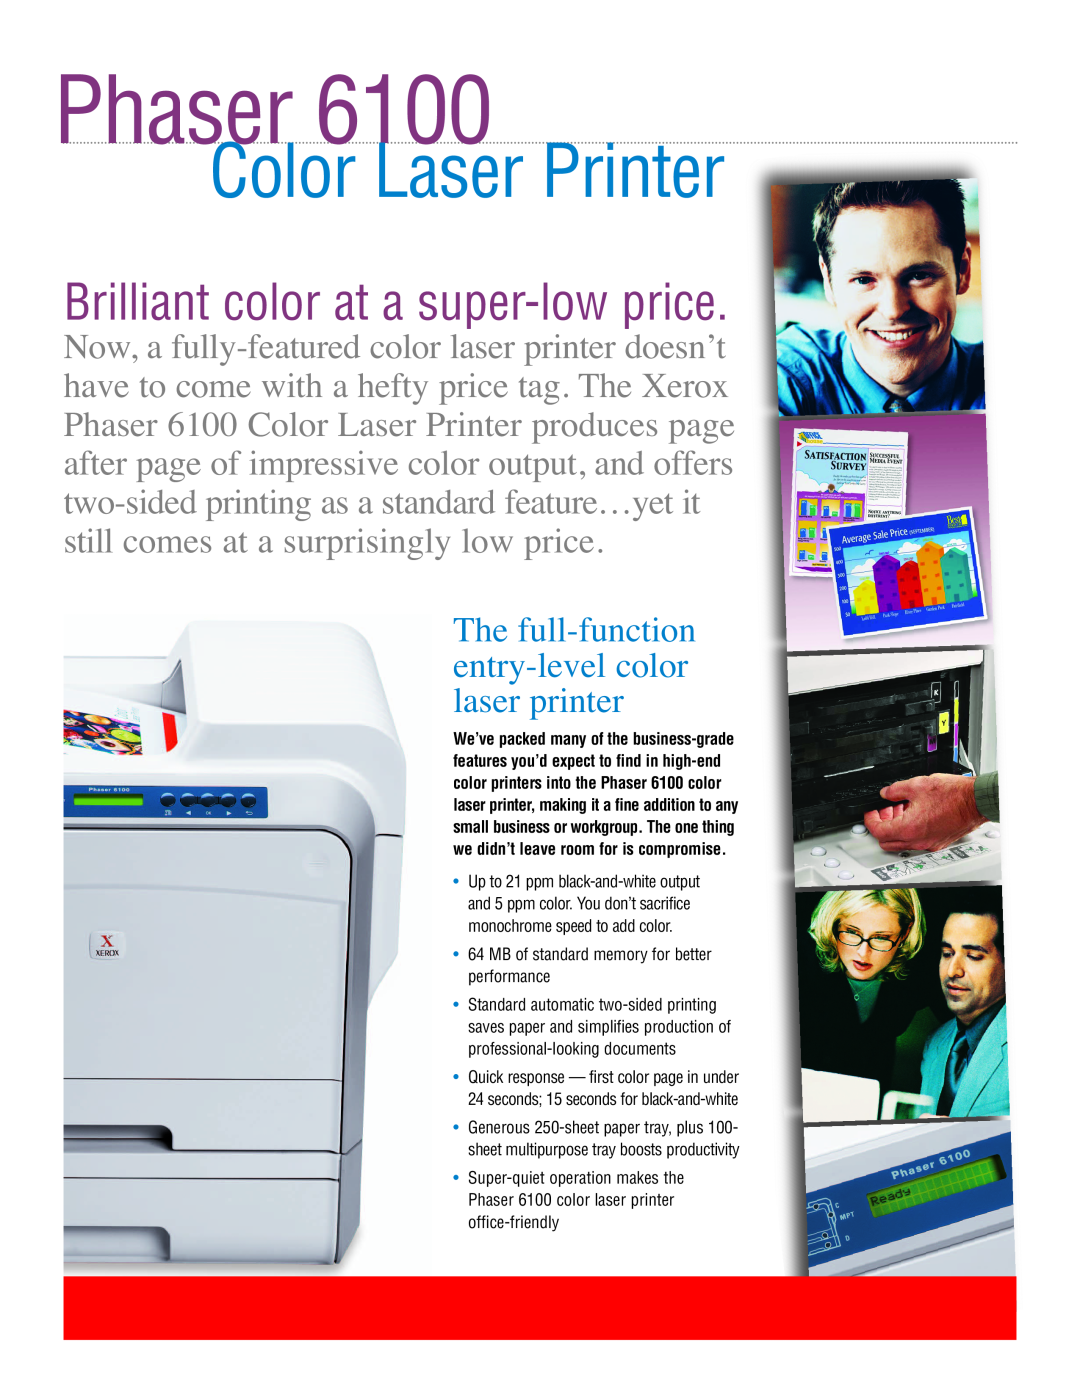 Xerox 6100DN manual Phaser, Color Laser Printer, Brilliant color at a super-low price 